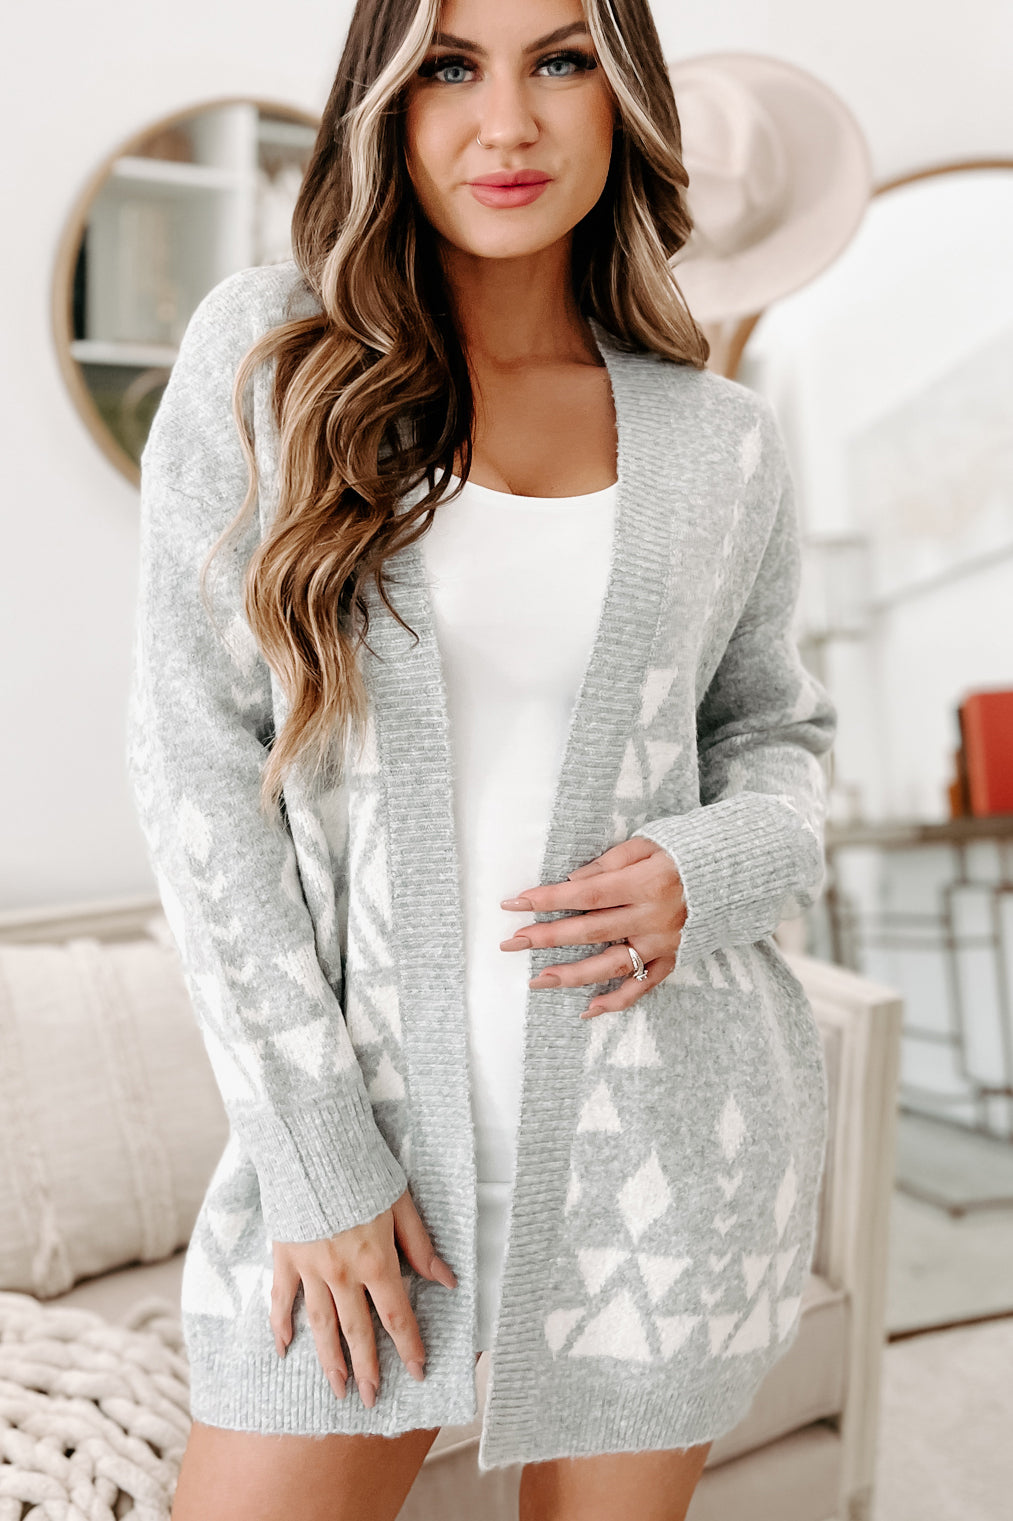 Holiday Steal- Keeping Us Together Printed Open Front Cardigan (Heather Grey) - NanaMacs